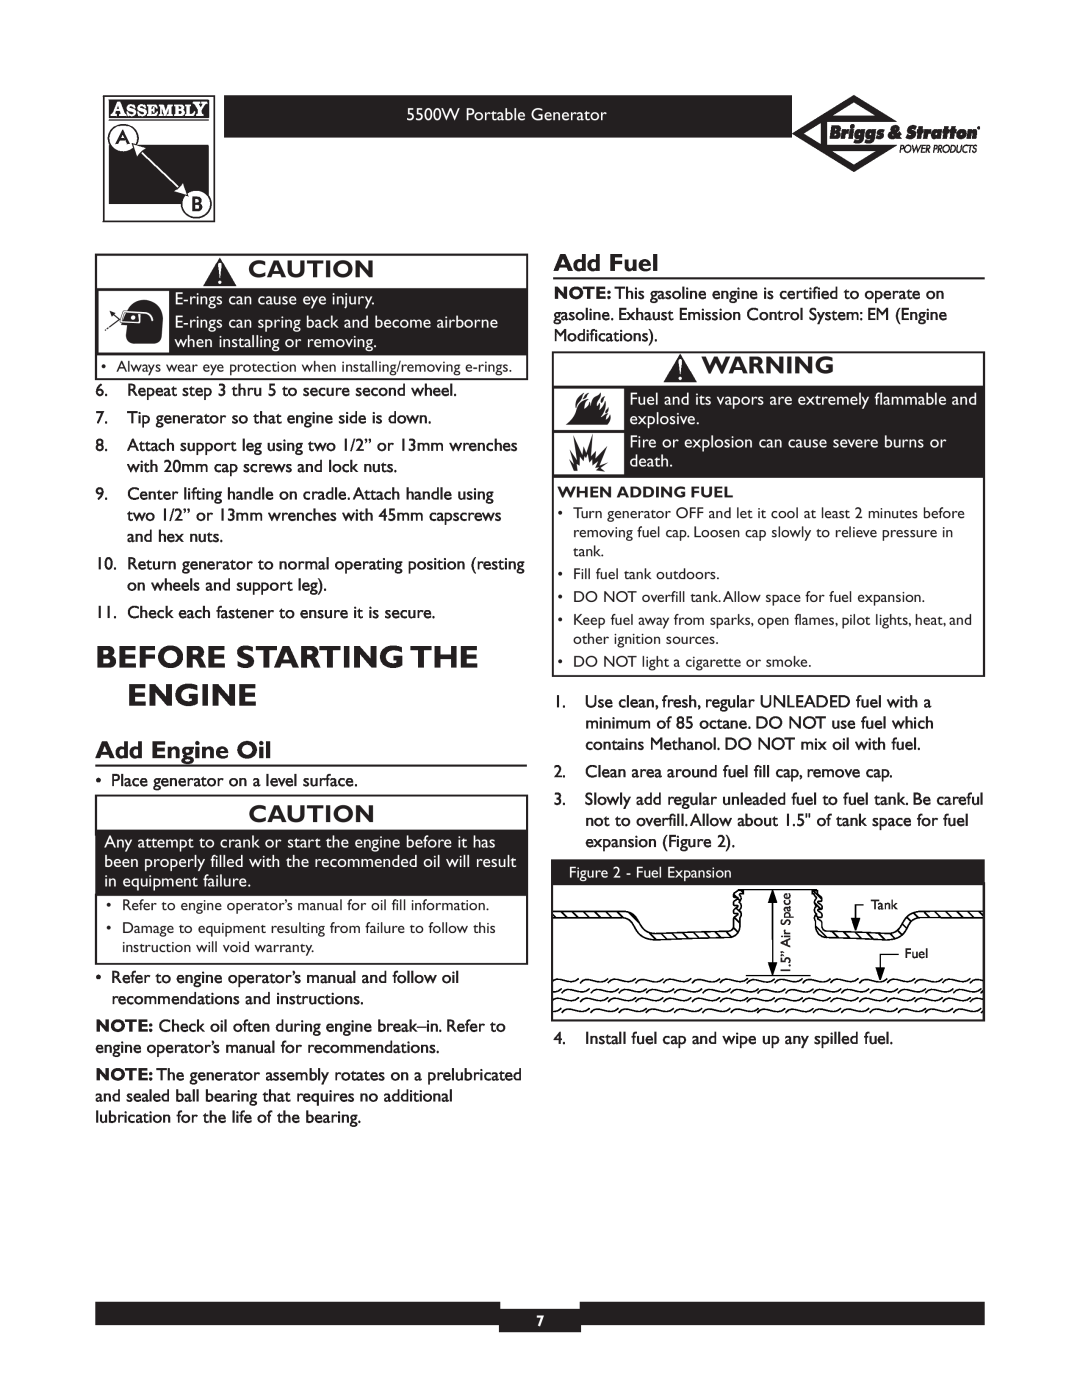 Briggs & Stratton 030209-1 operating instructions Before Starting The Engine, Add Engine Oil, Add Fuel 